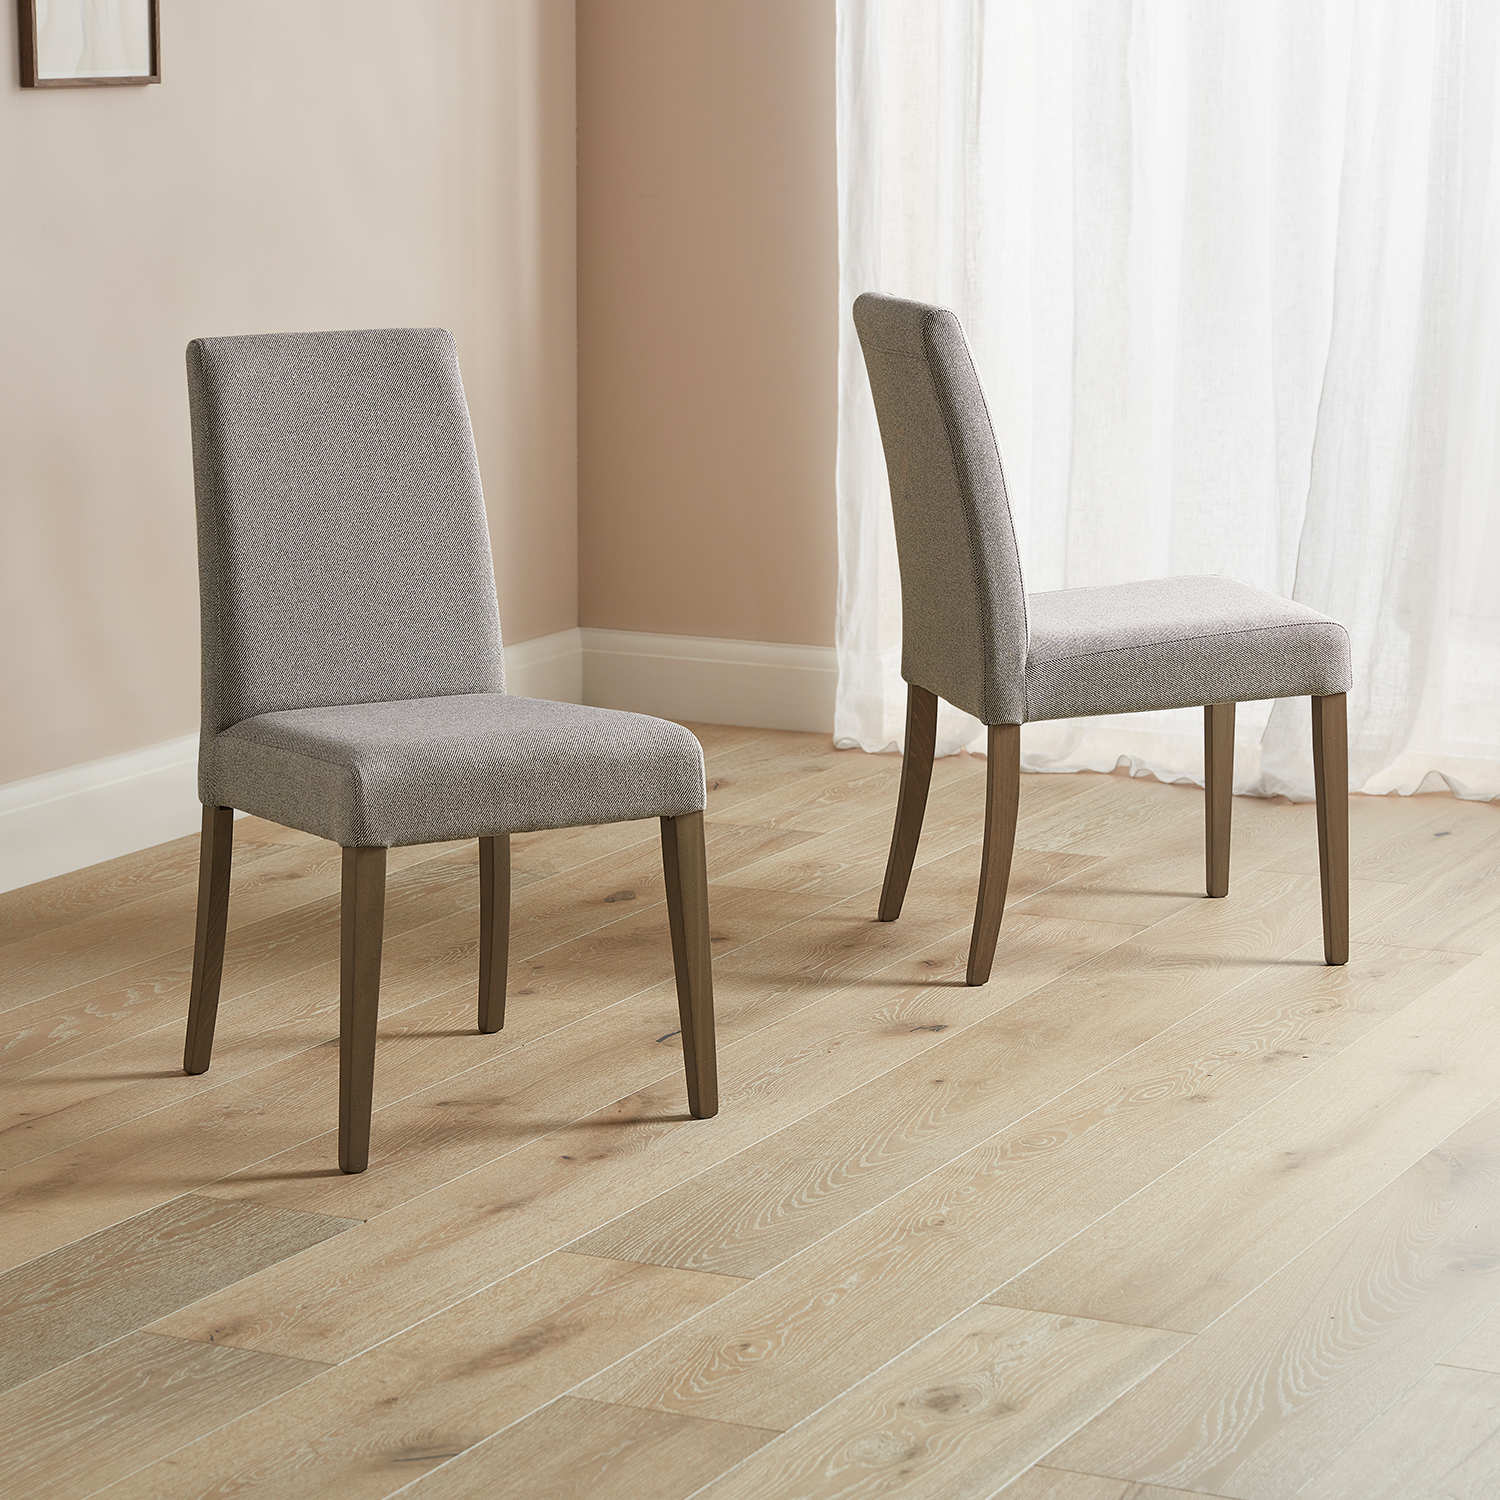 pair of Selwood dining chairs in mushroom with dark wood legs placed on a wooden floor